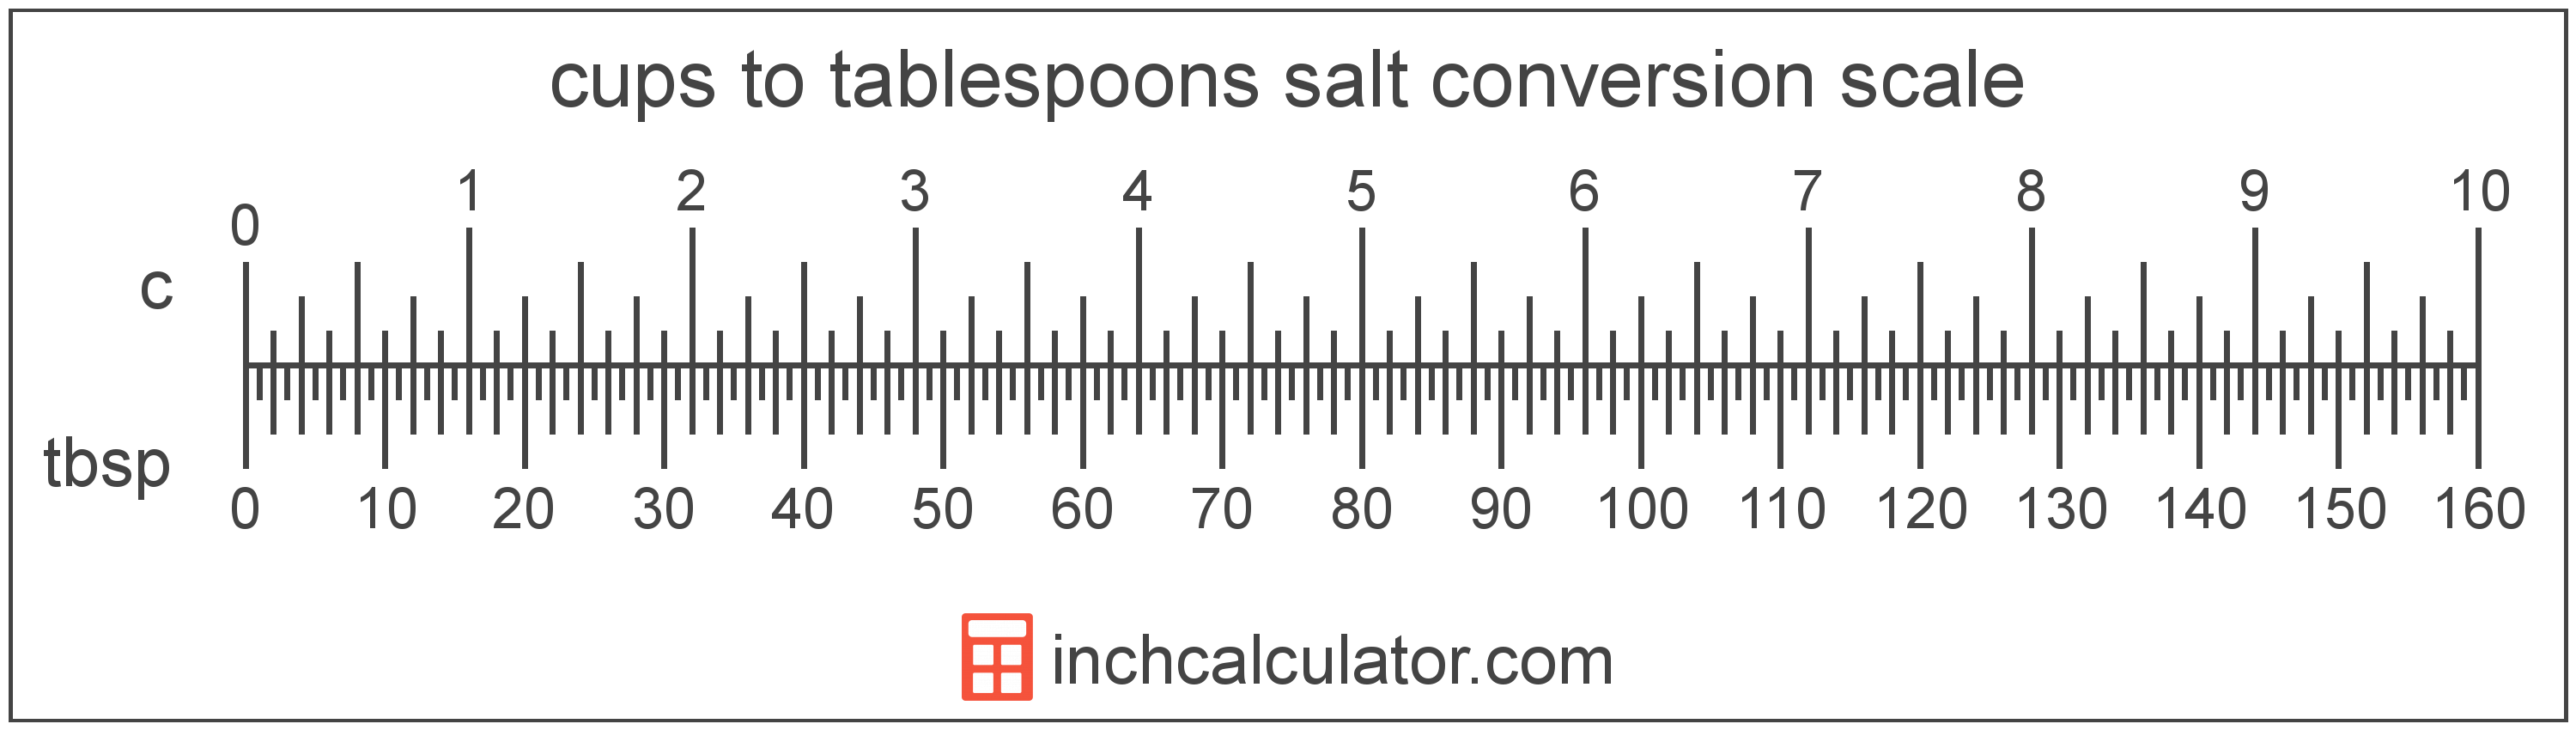 https://www.inchcalculator.com/a/img/unit-conversion/cup-salt-to-tablespoon-salt-conversion-scale.png